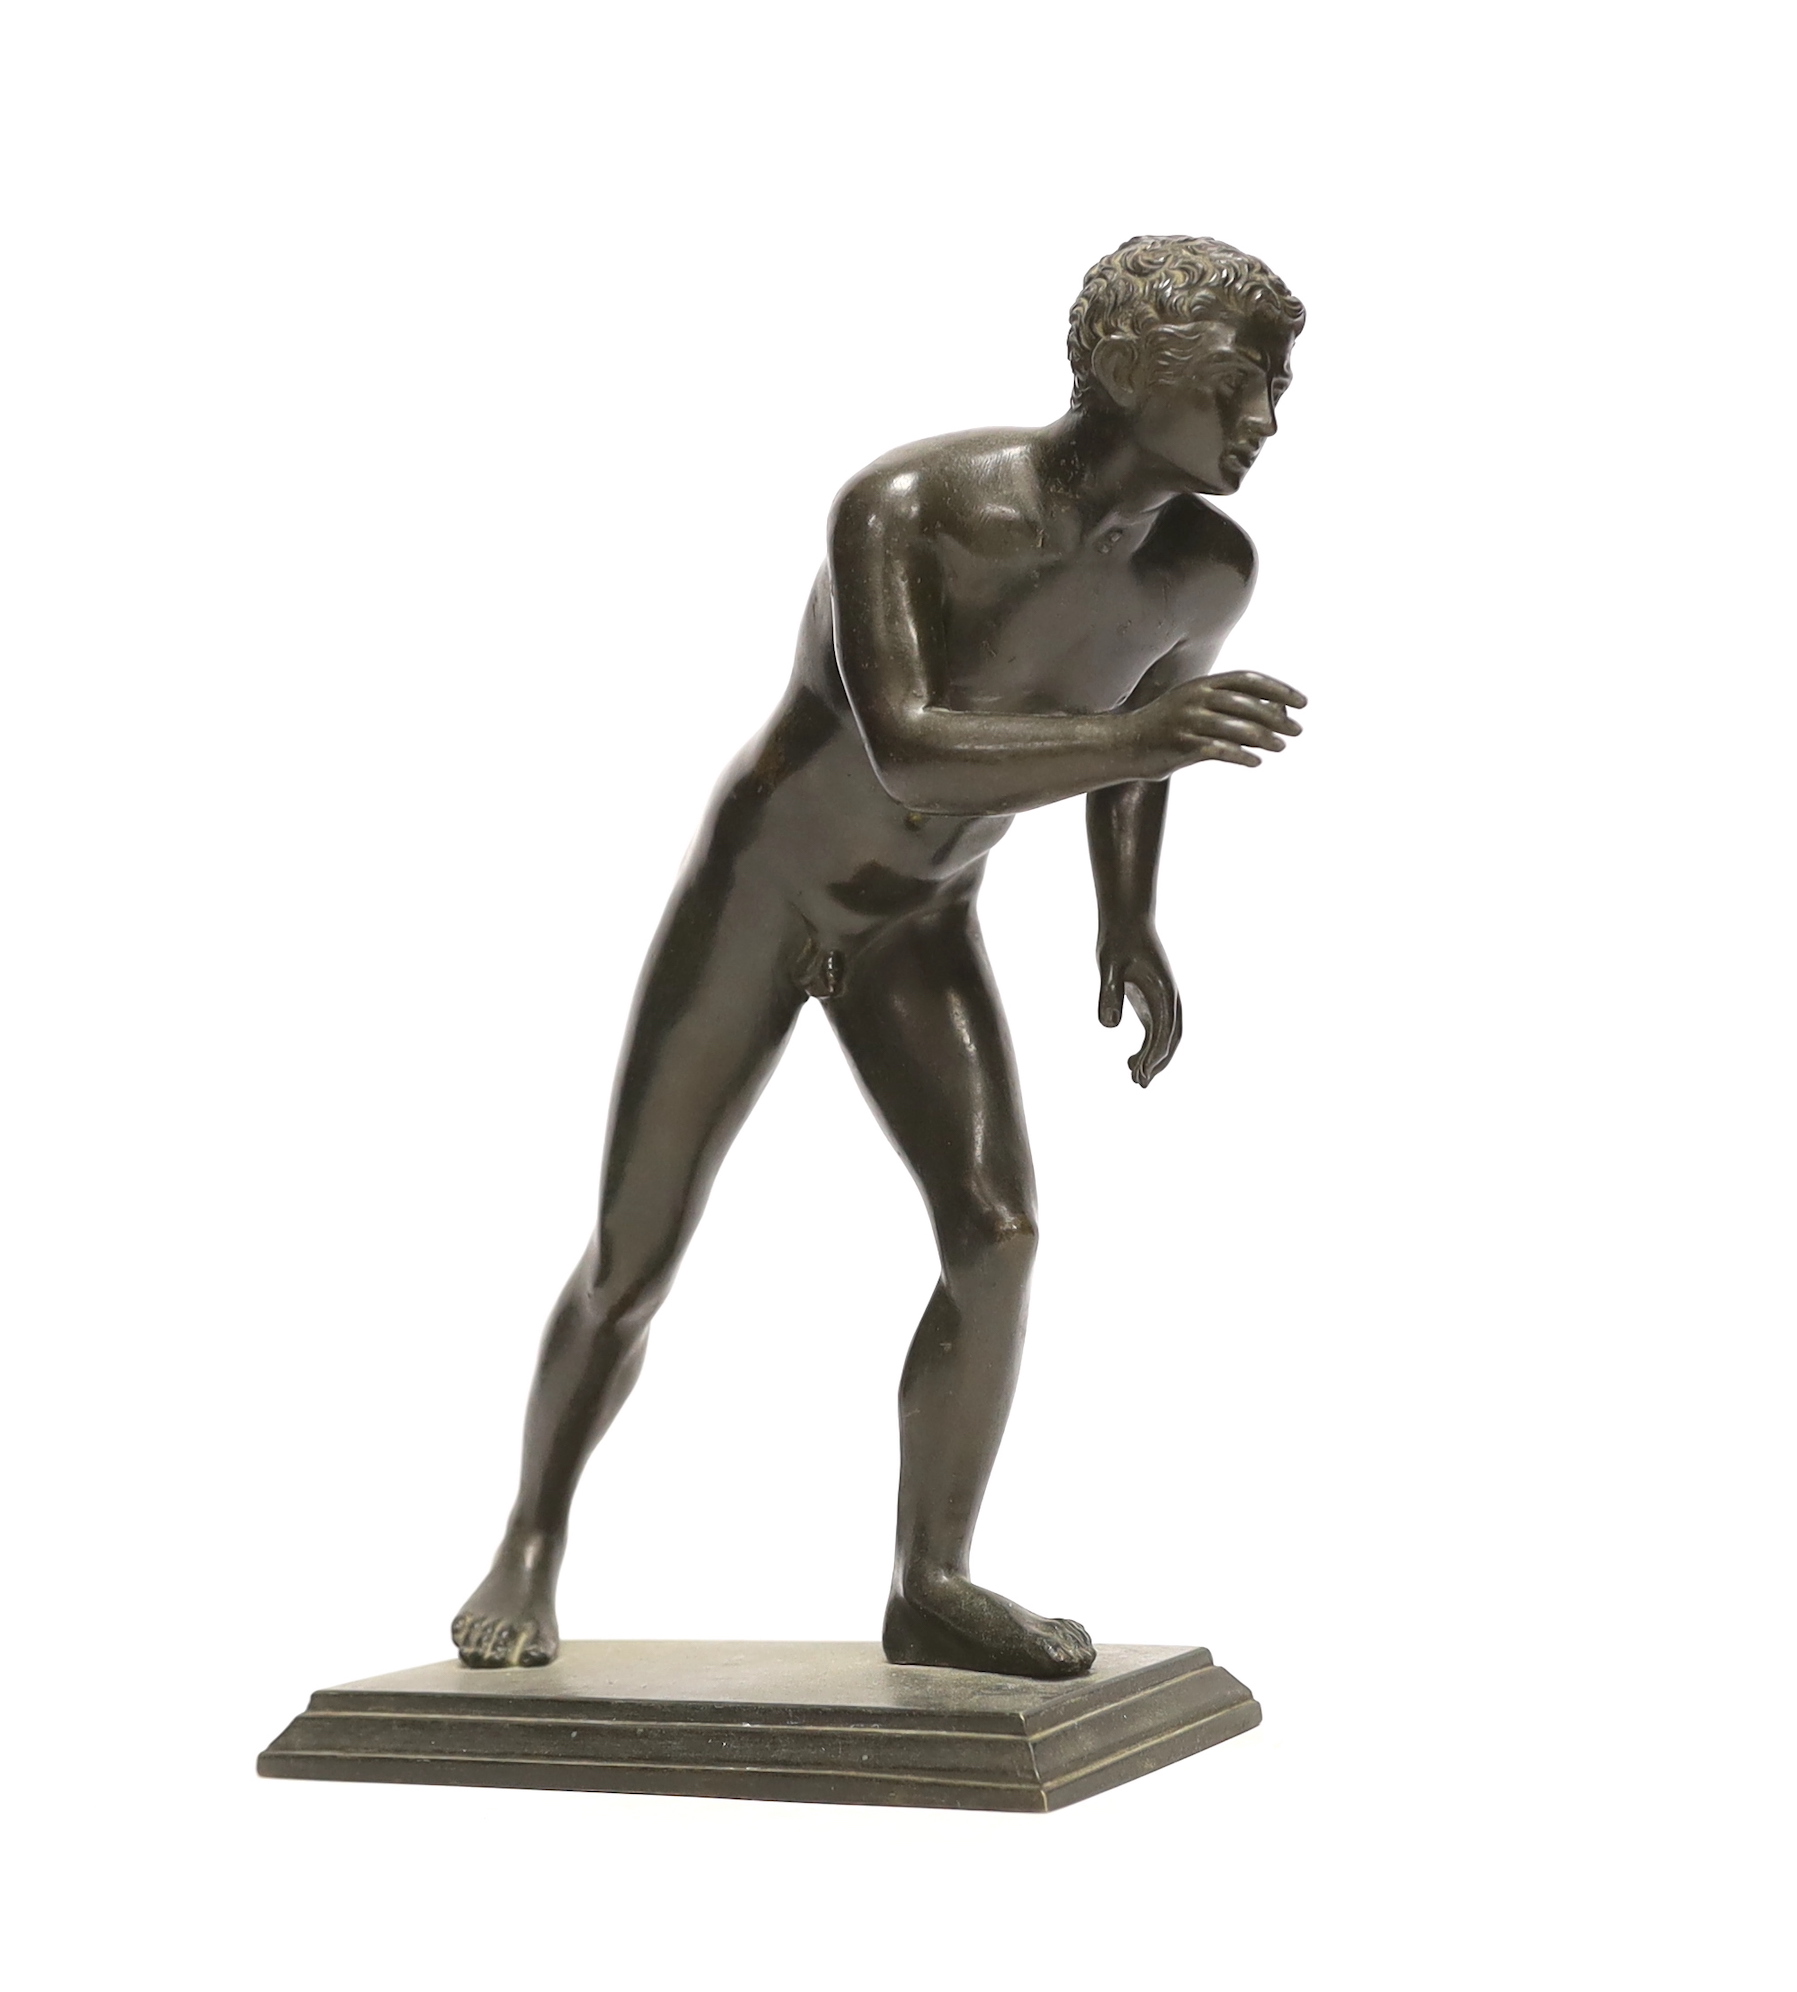 After The Antique, a bronze figure of an athlete, 26cm high                                                                                                                                                                 